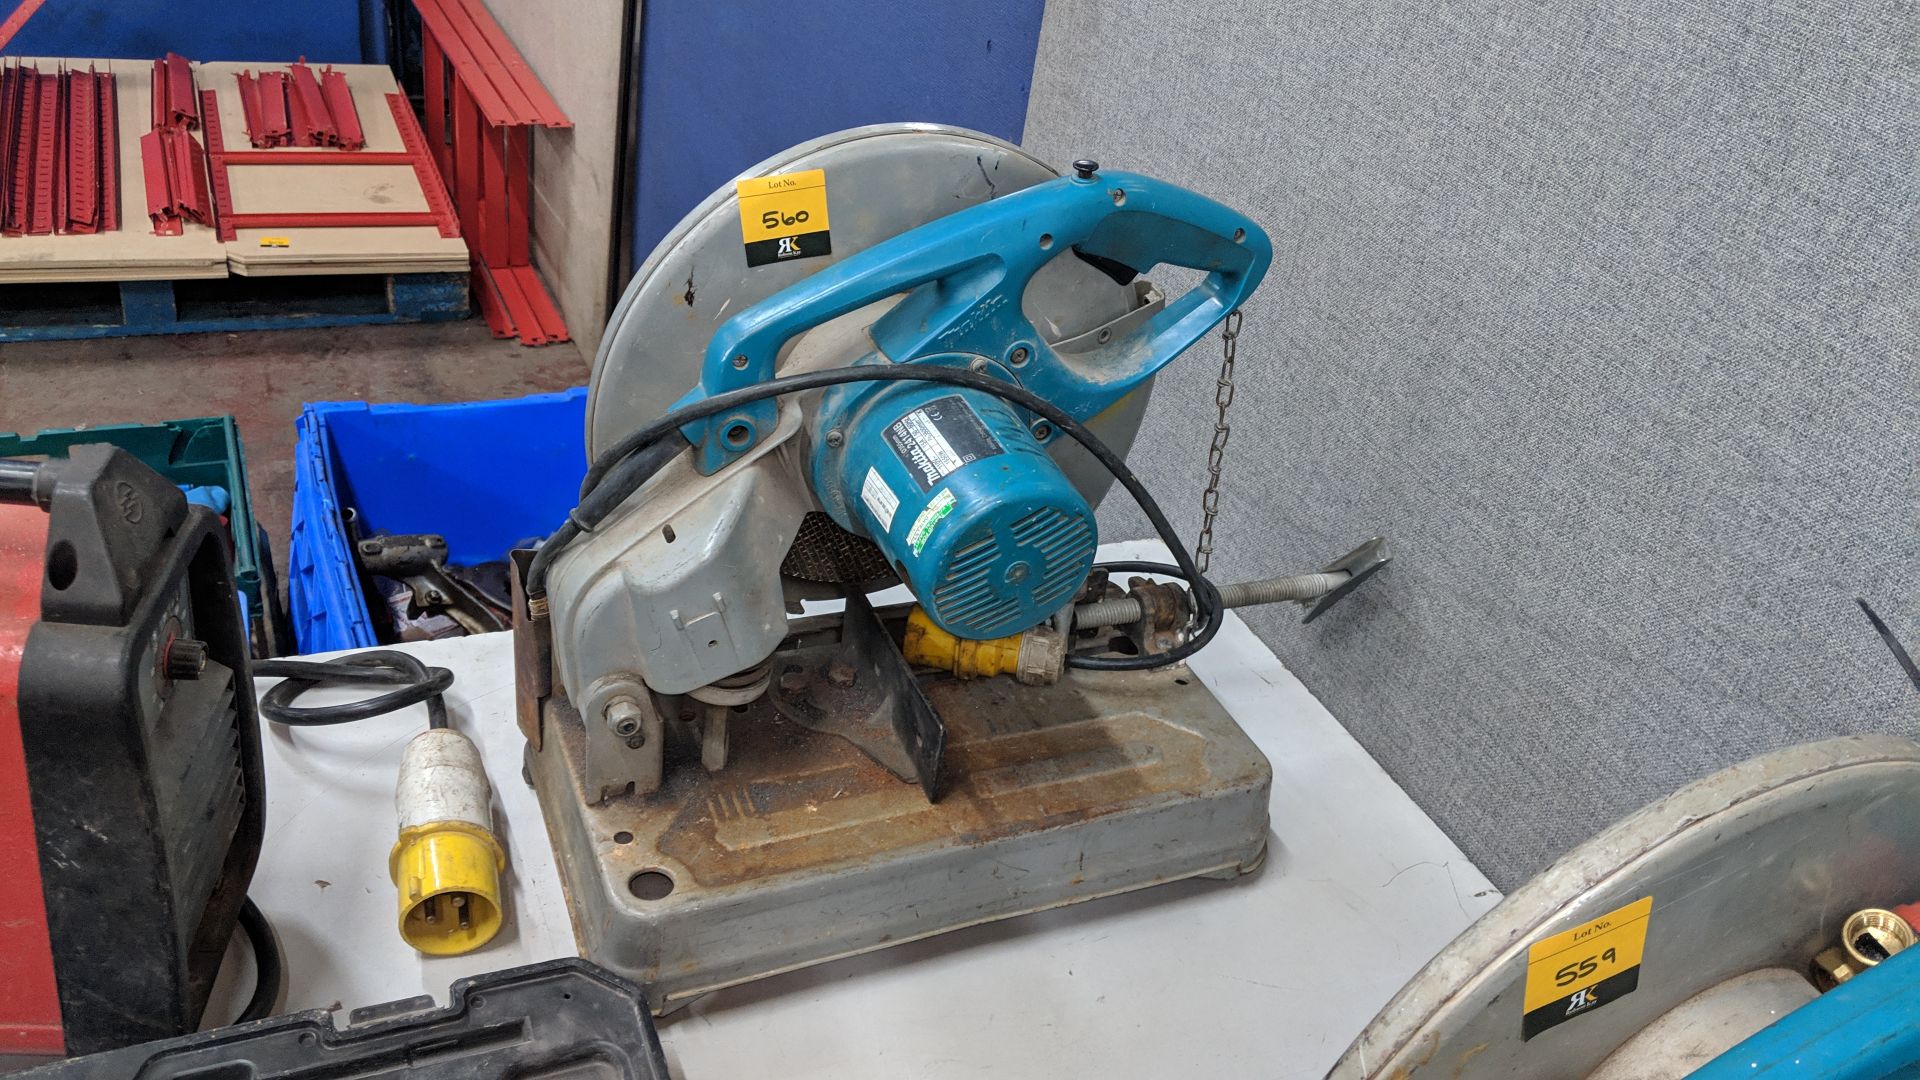 Makita 110v pull down chop saw model 2414NB This is one of a number of lots being sold on behalf